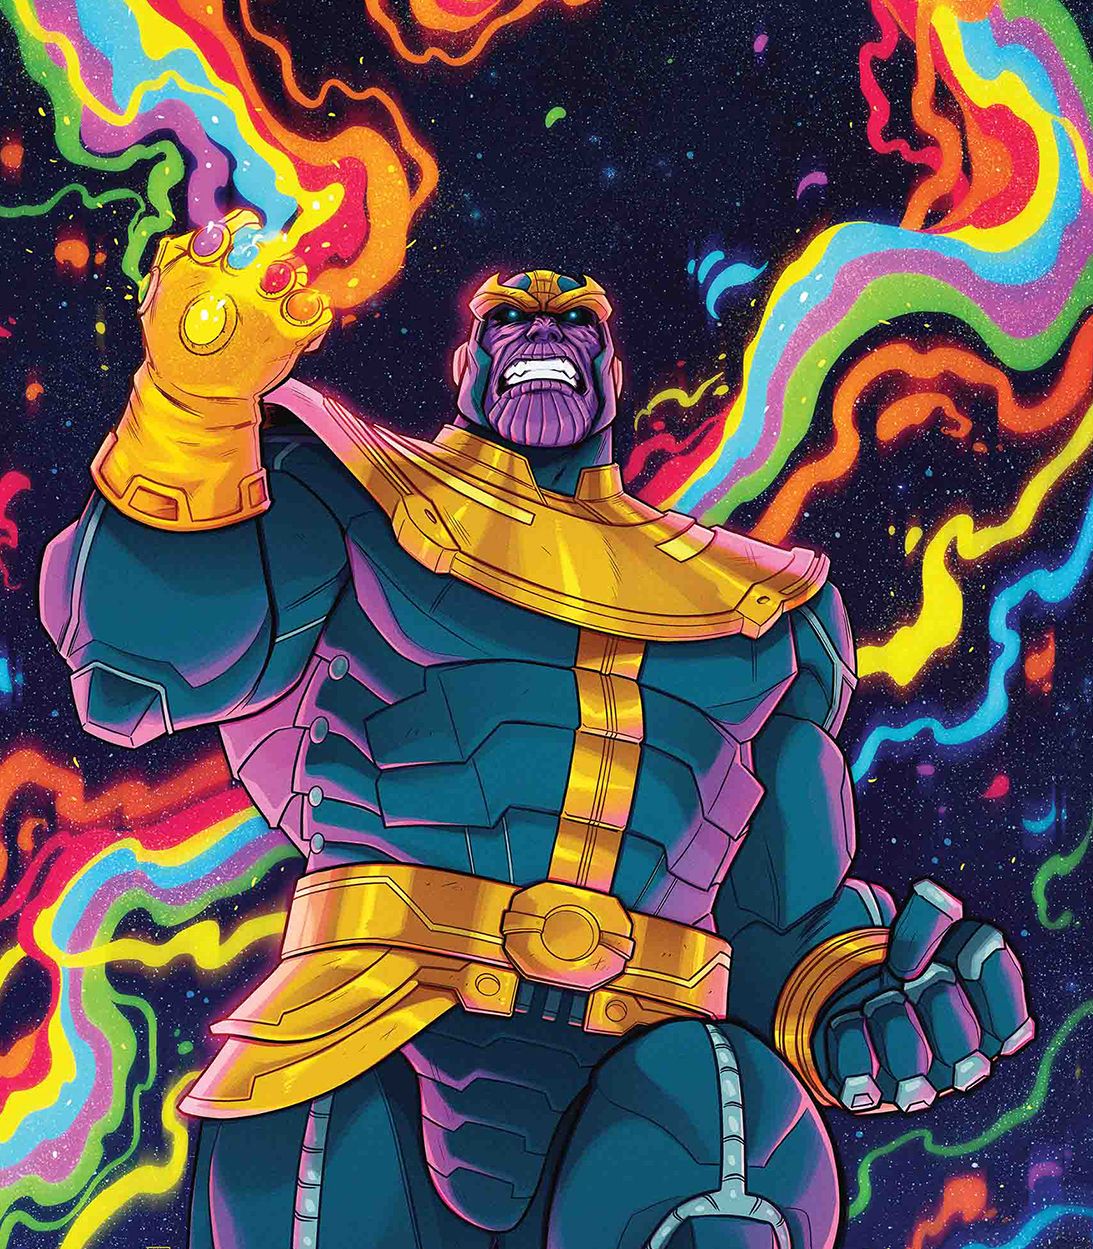 Thanos and the Infinity Gauntlet in Marvel Tales Thanos #1 by Jen Bartel